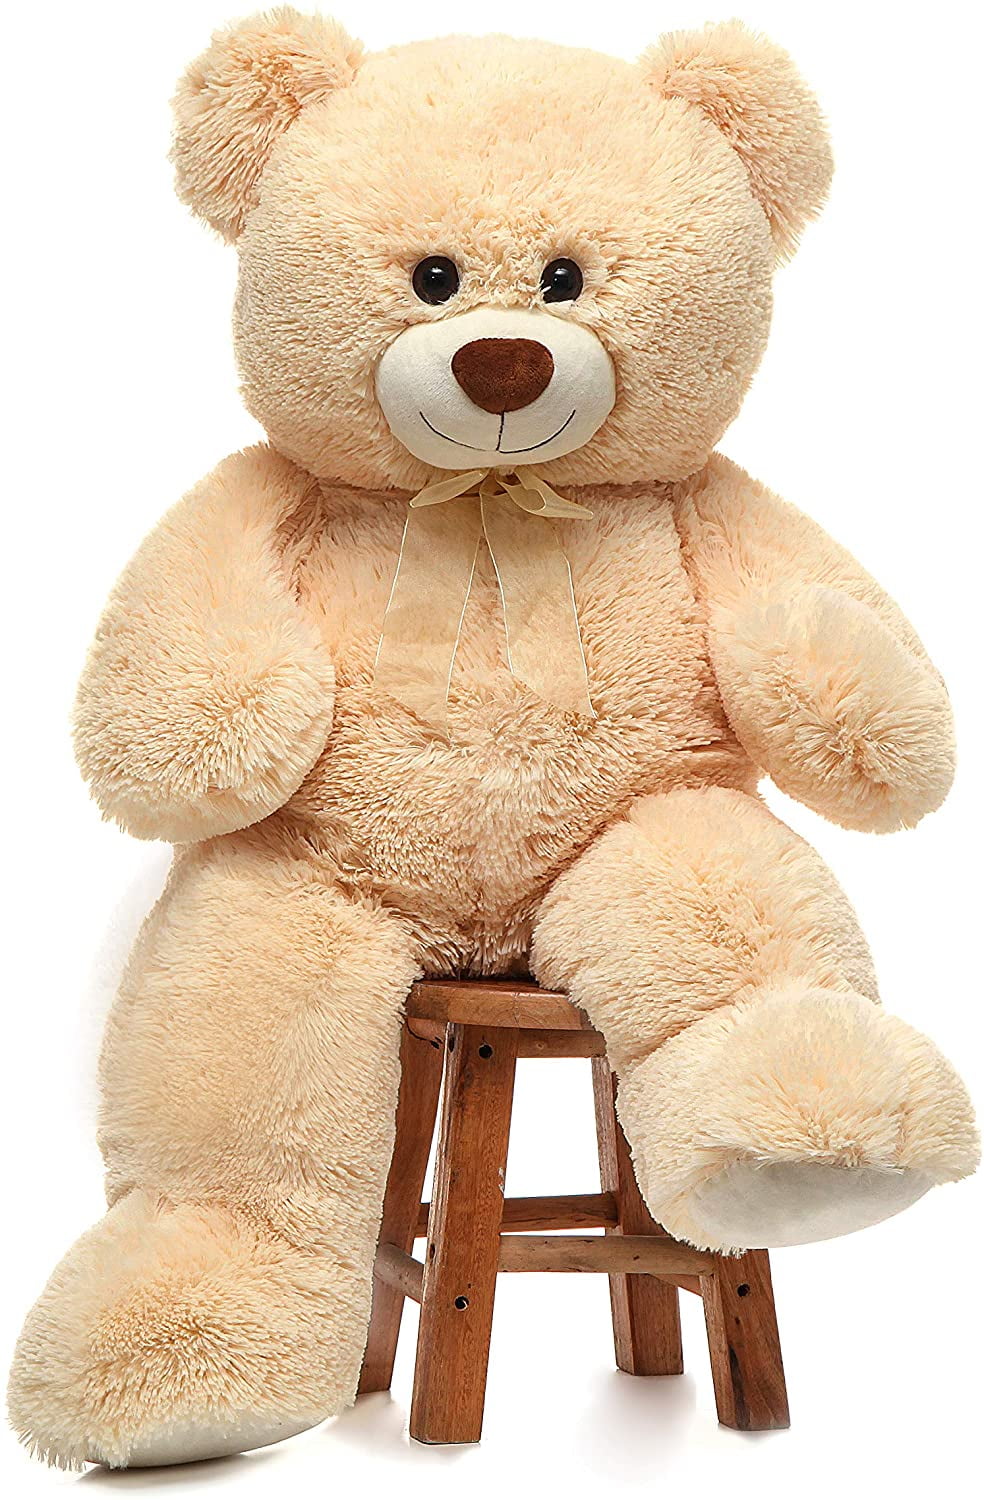 Large Teddy Bear 100cm Great Present Gift Kid Surprise Large Cuddly Teddy Brown 